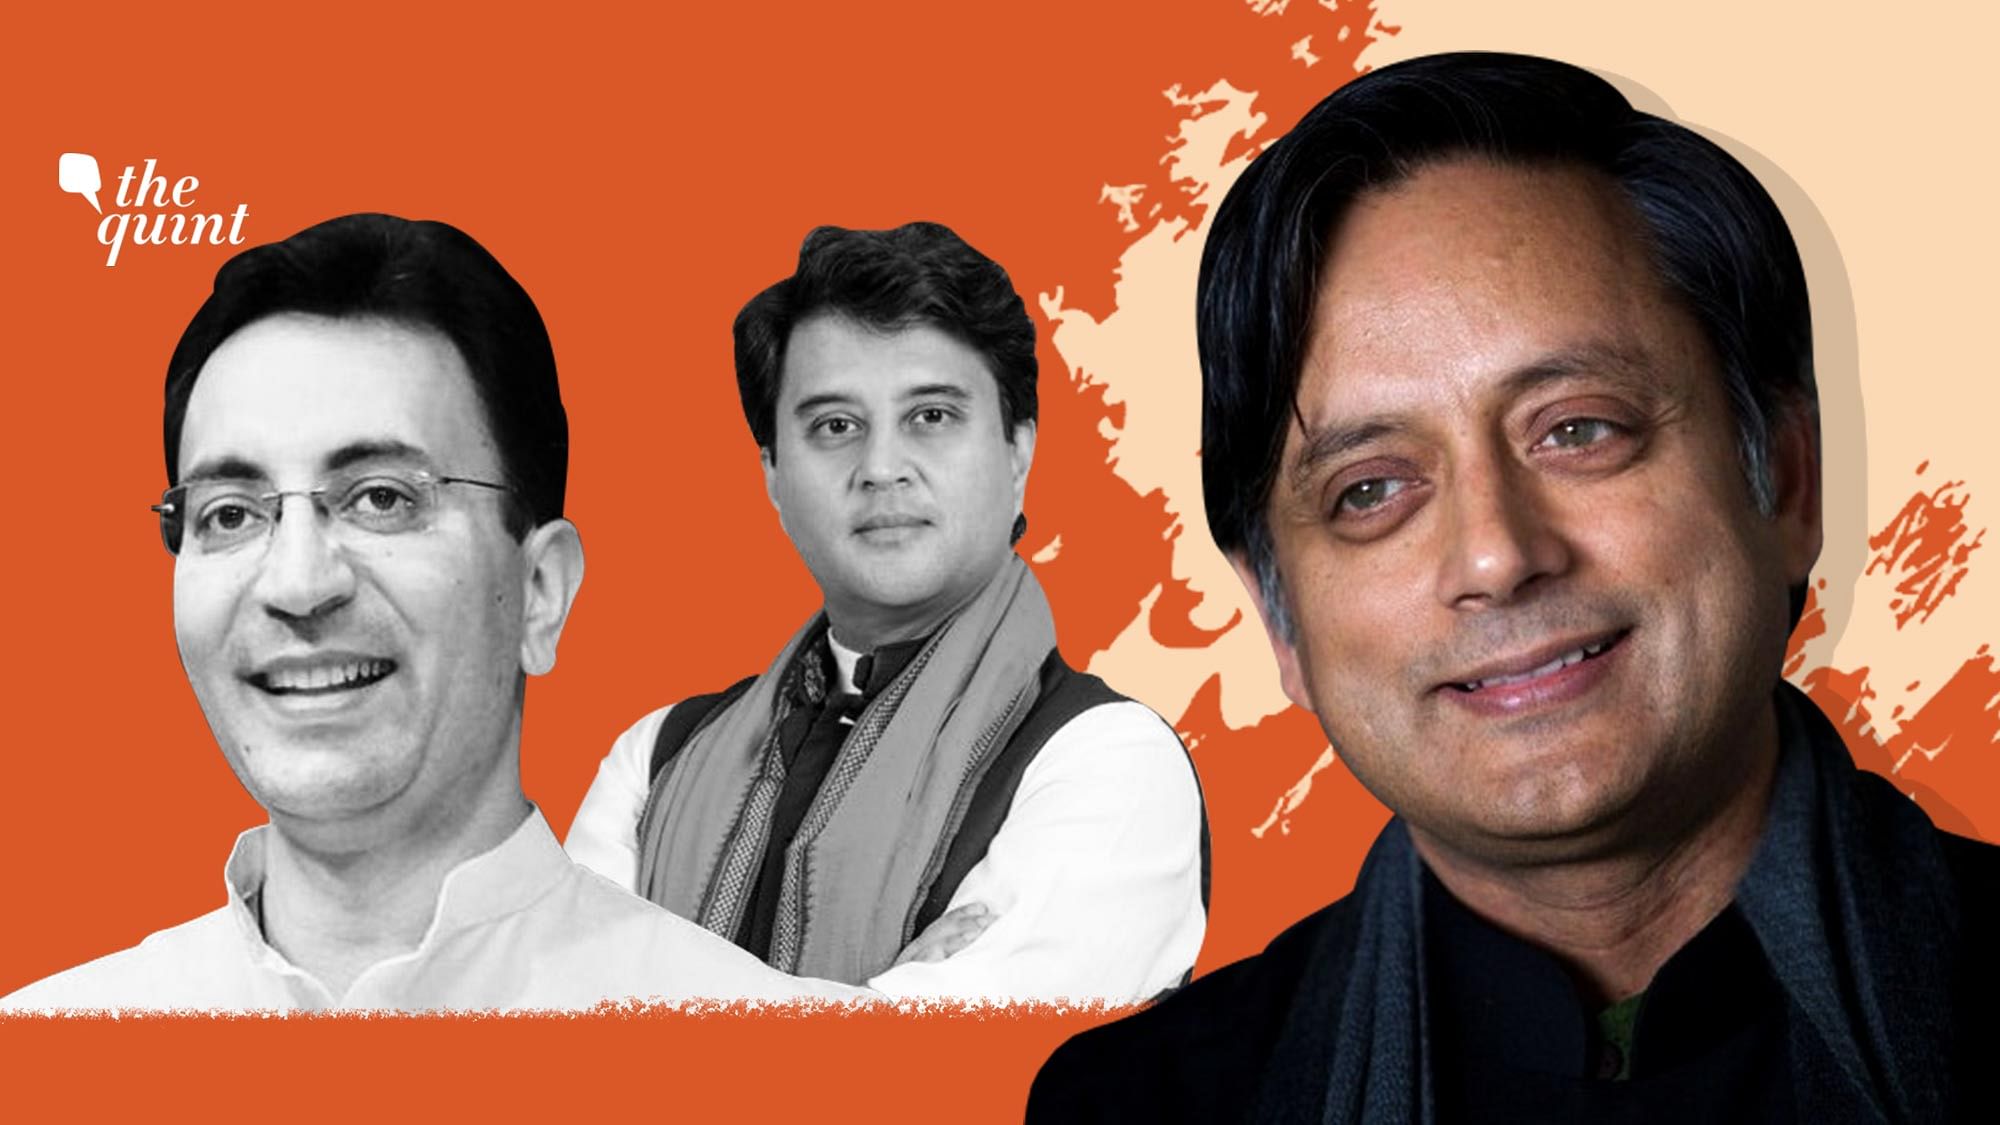 Image of Dr Shashi Tharoor (extreme R) — who is the author of this op-ed — and ex-Congress leaders Jitin Prasada (L) and Jyotiraditya Scindia (Centre), who defected to BJP, used for representational purposes.